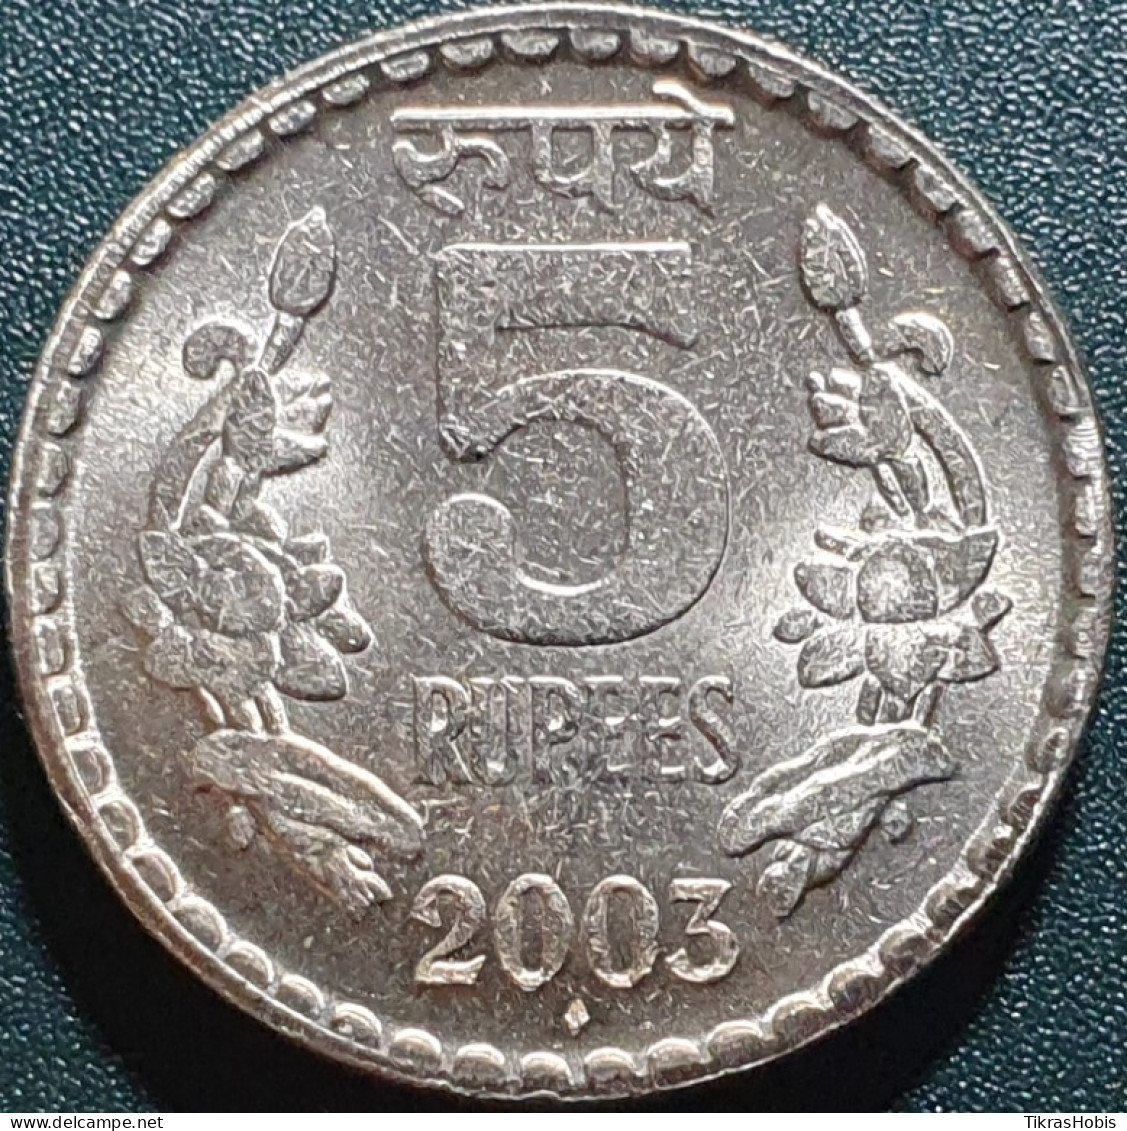 India 5 Rupees, 2003 Km154 - Indien